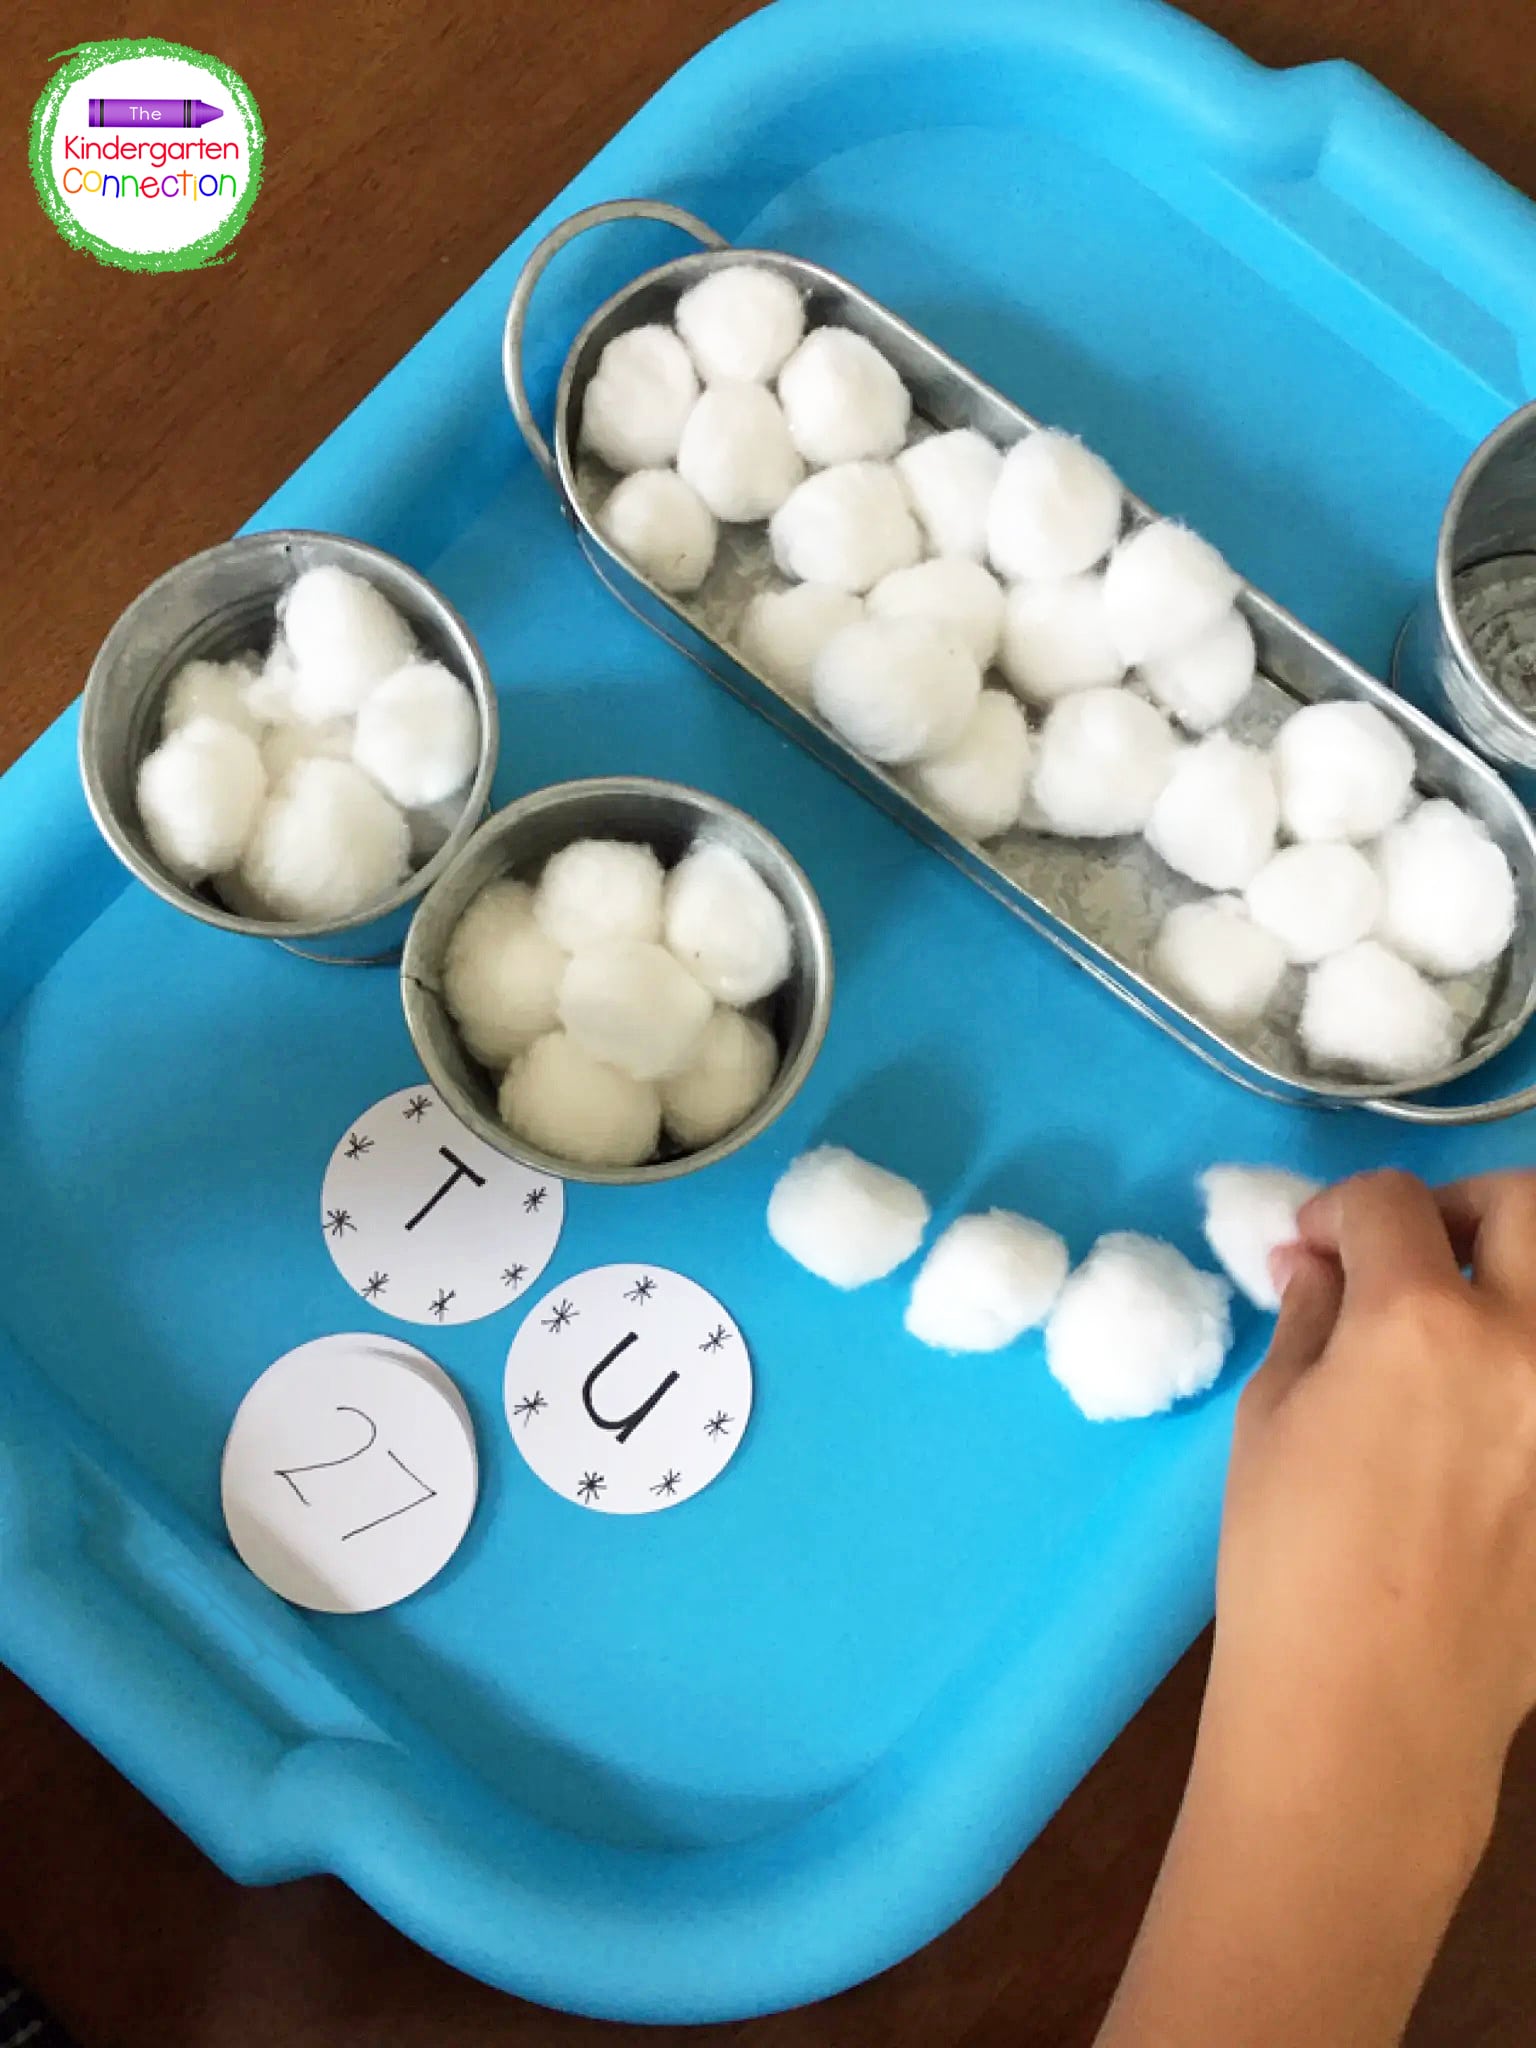 Students will place ten cotton balls in each bucket to represent a ten. The ones go on the side.